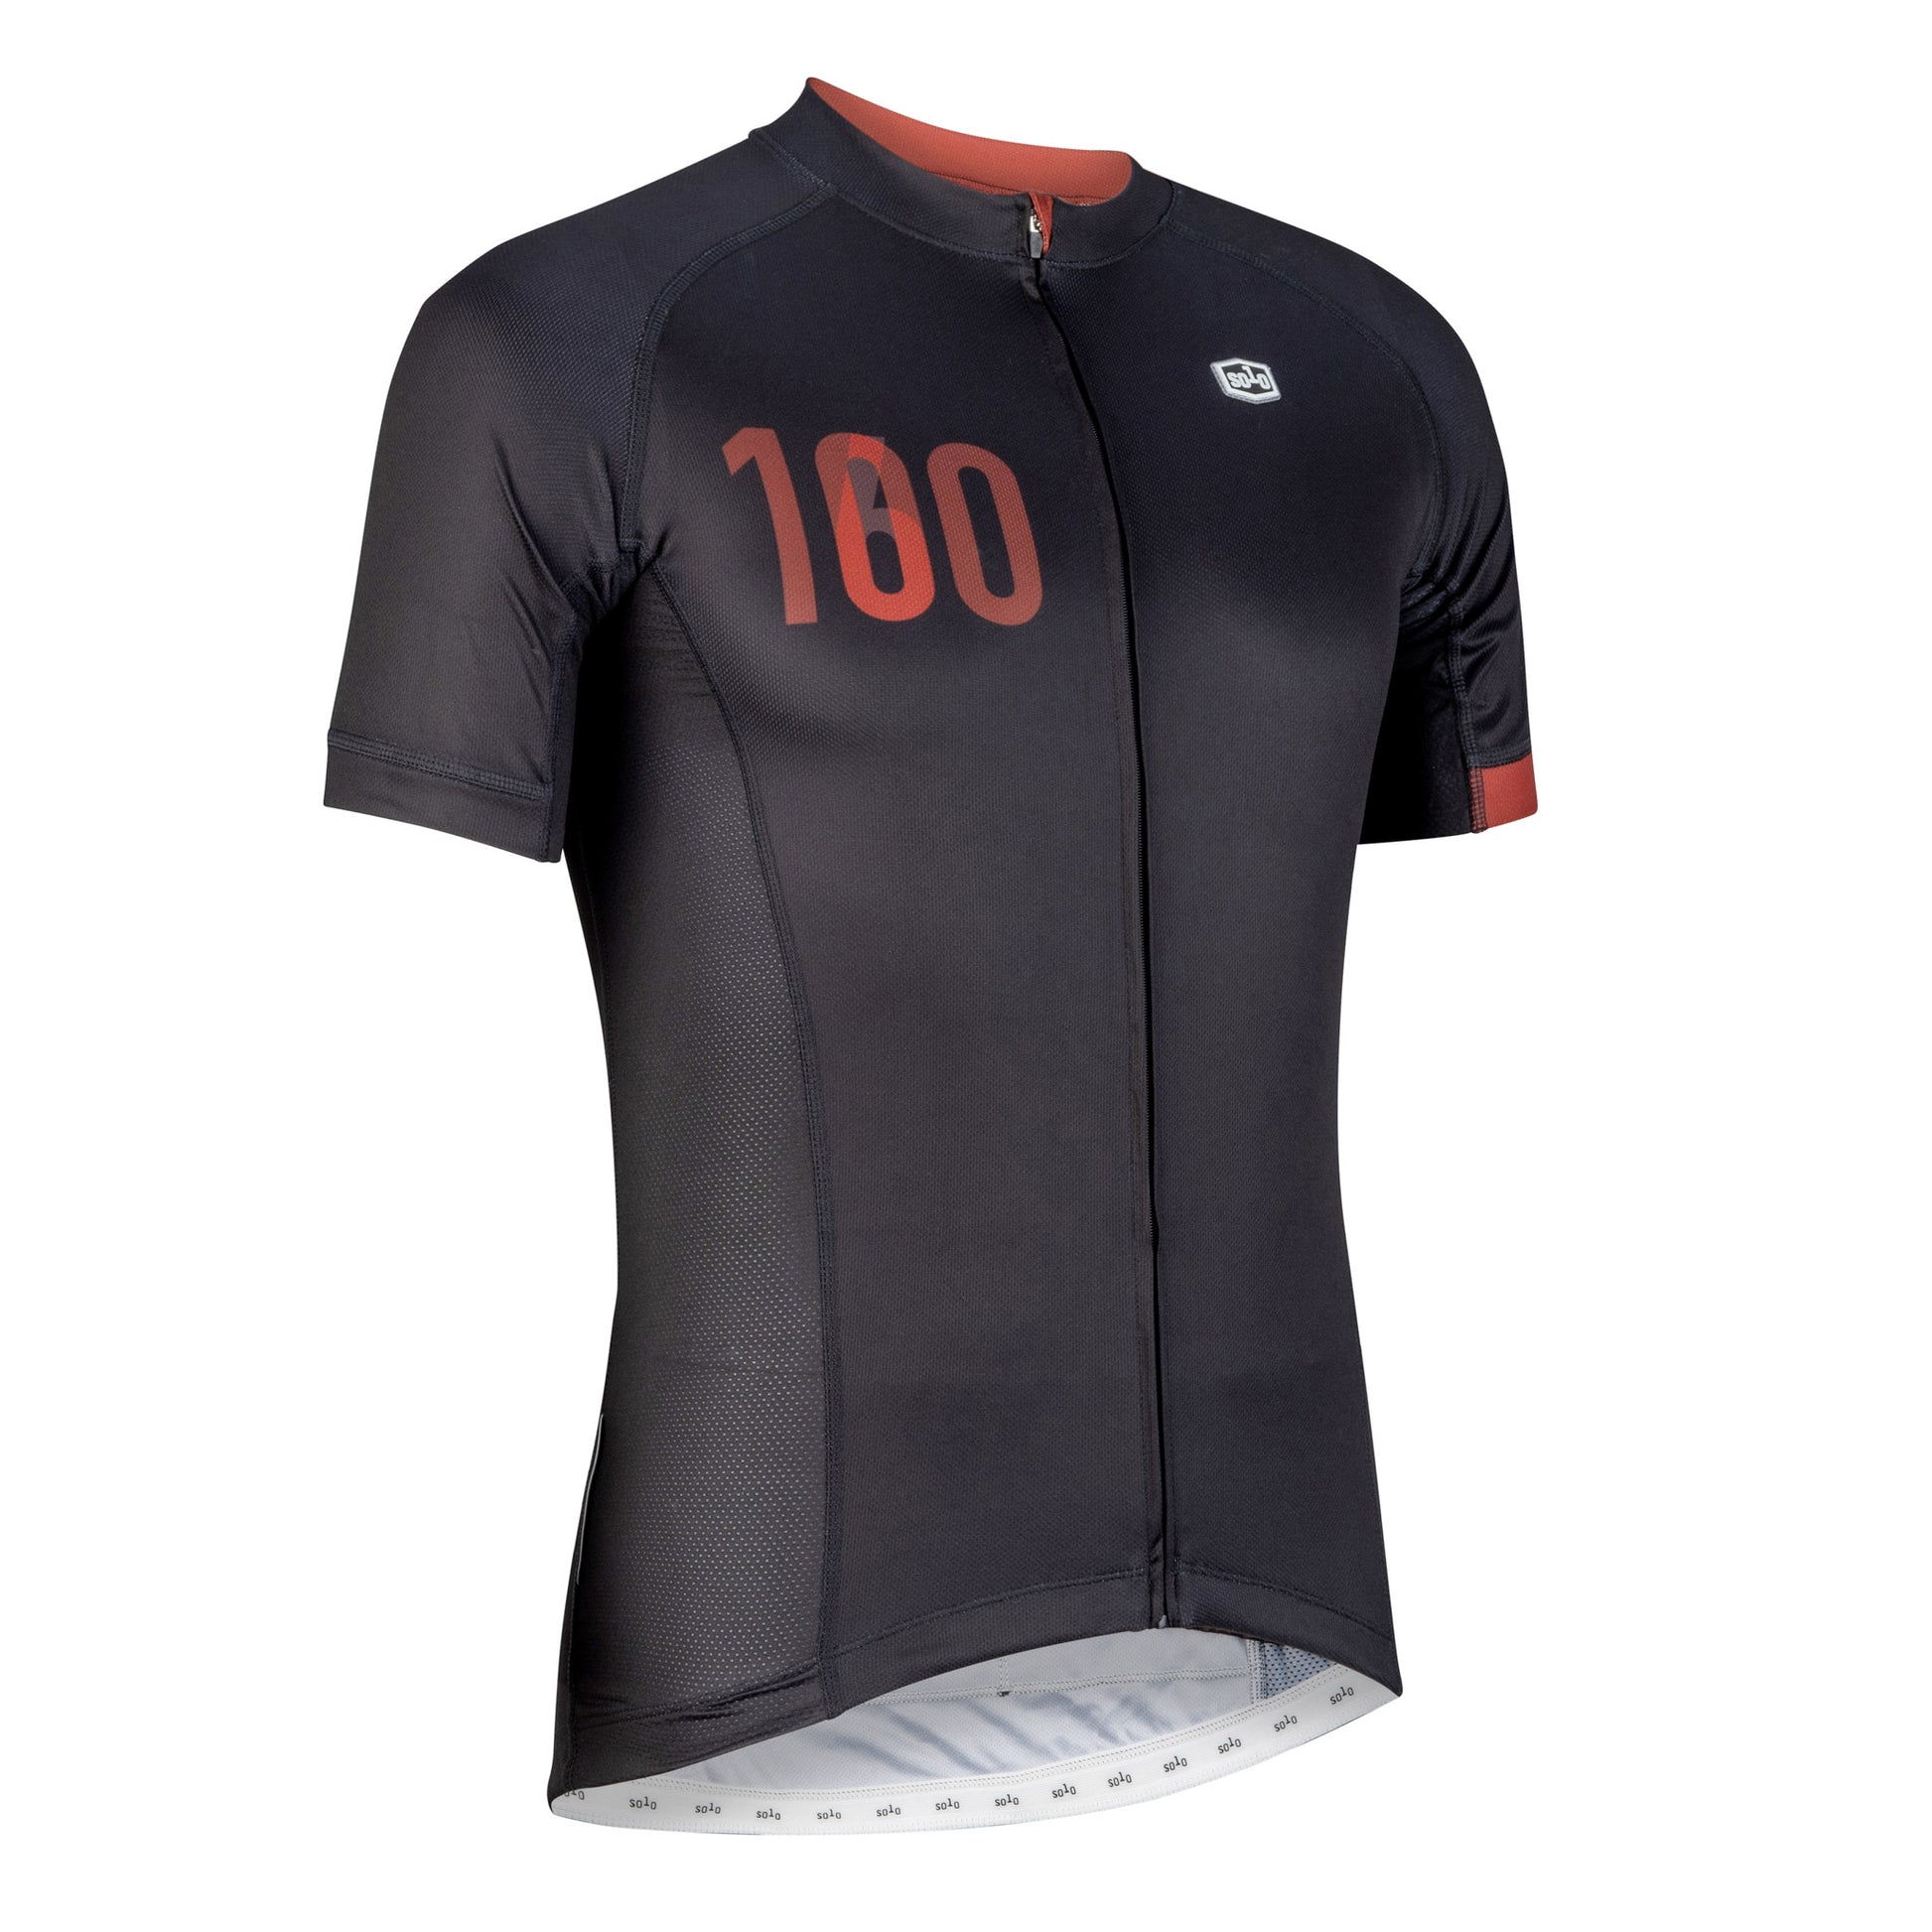 Solo Mens Century Jersey, Black/Red, buy online at Woolys Wheels Sydney with free delivery!